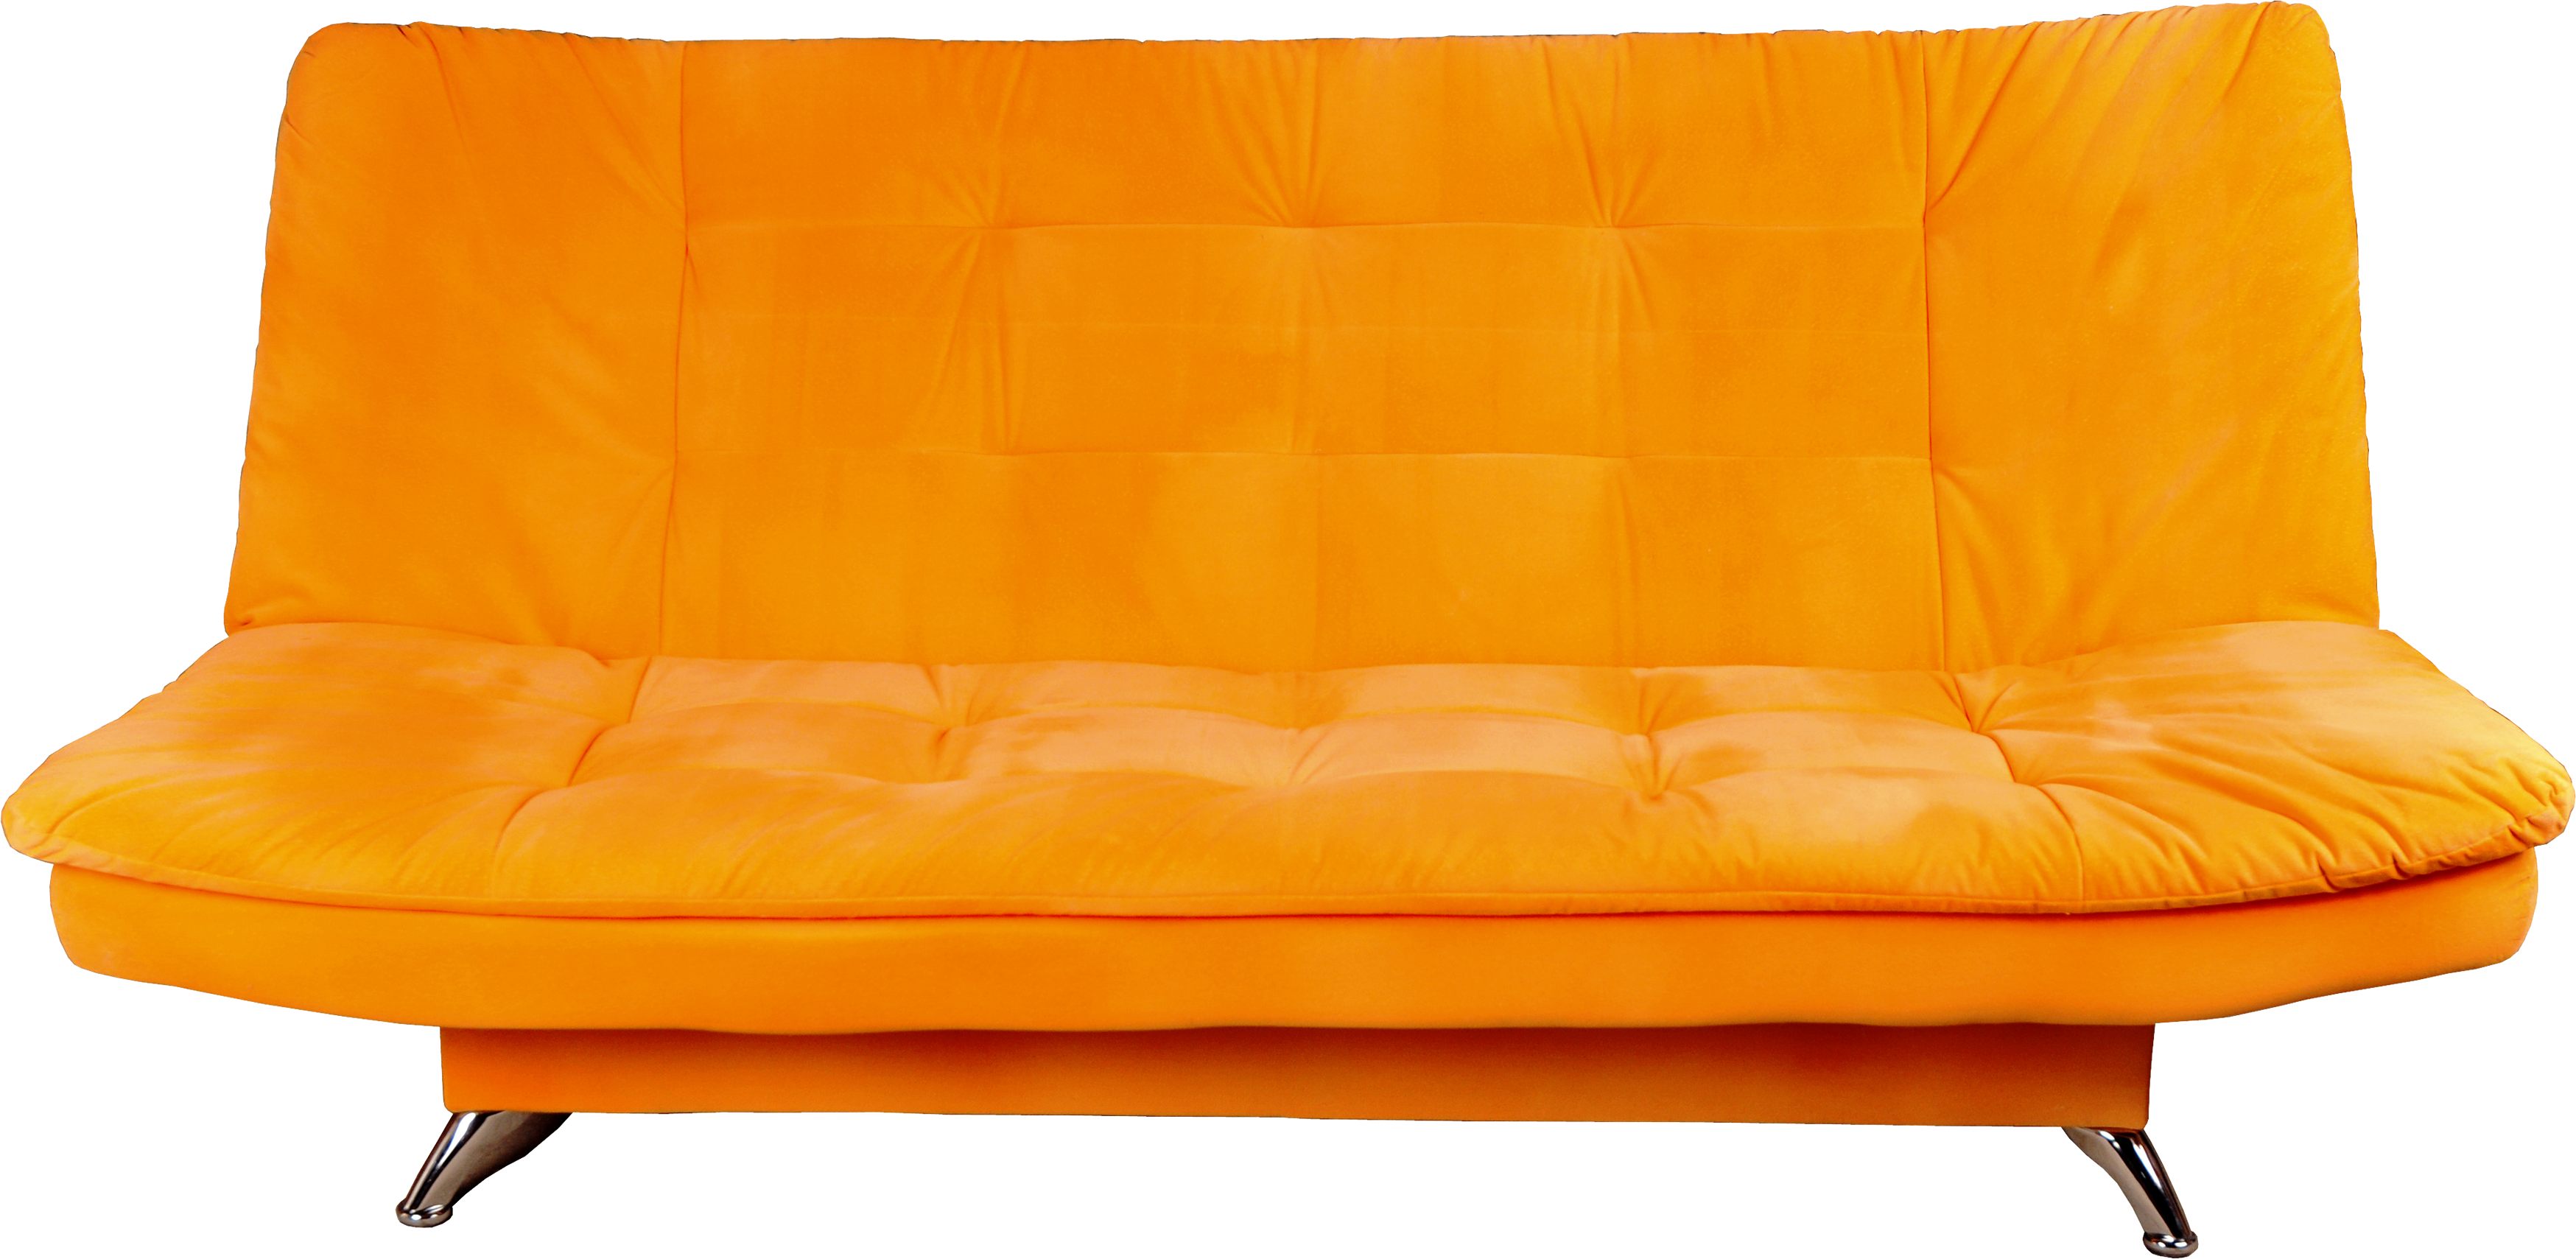 Png images free download. Couch clipart single sofa